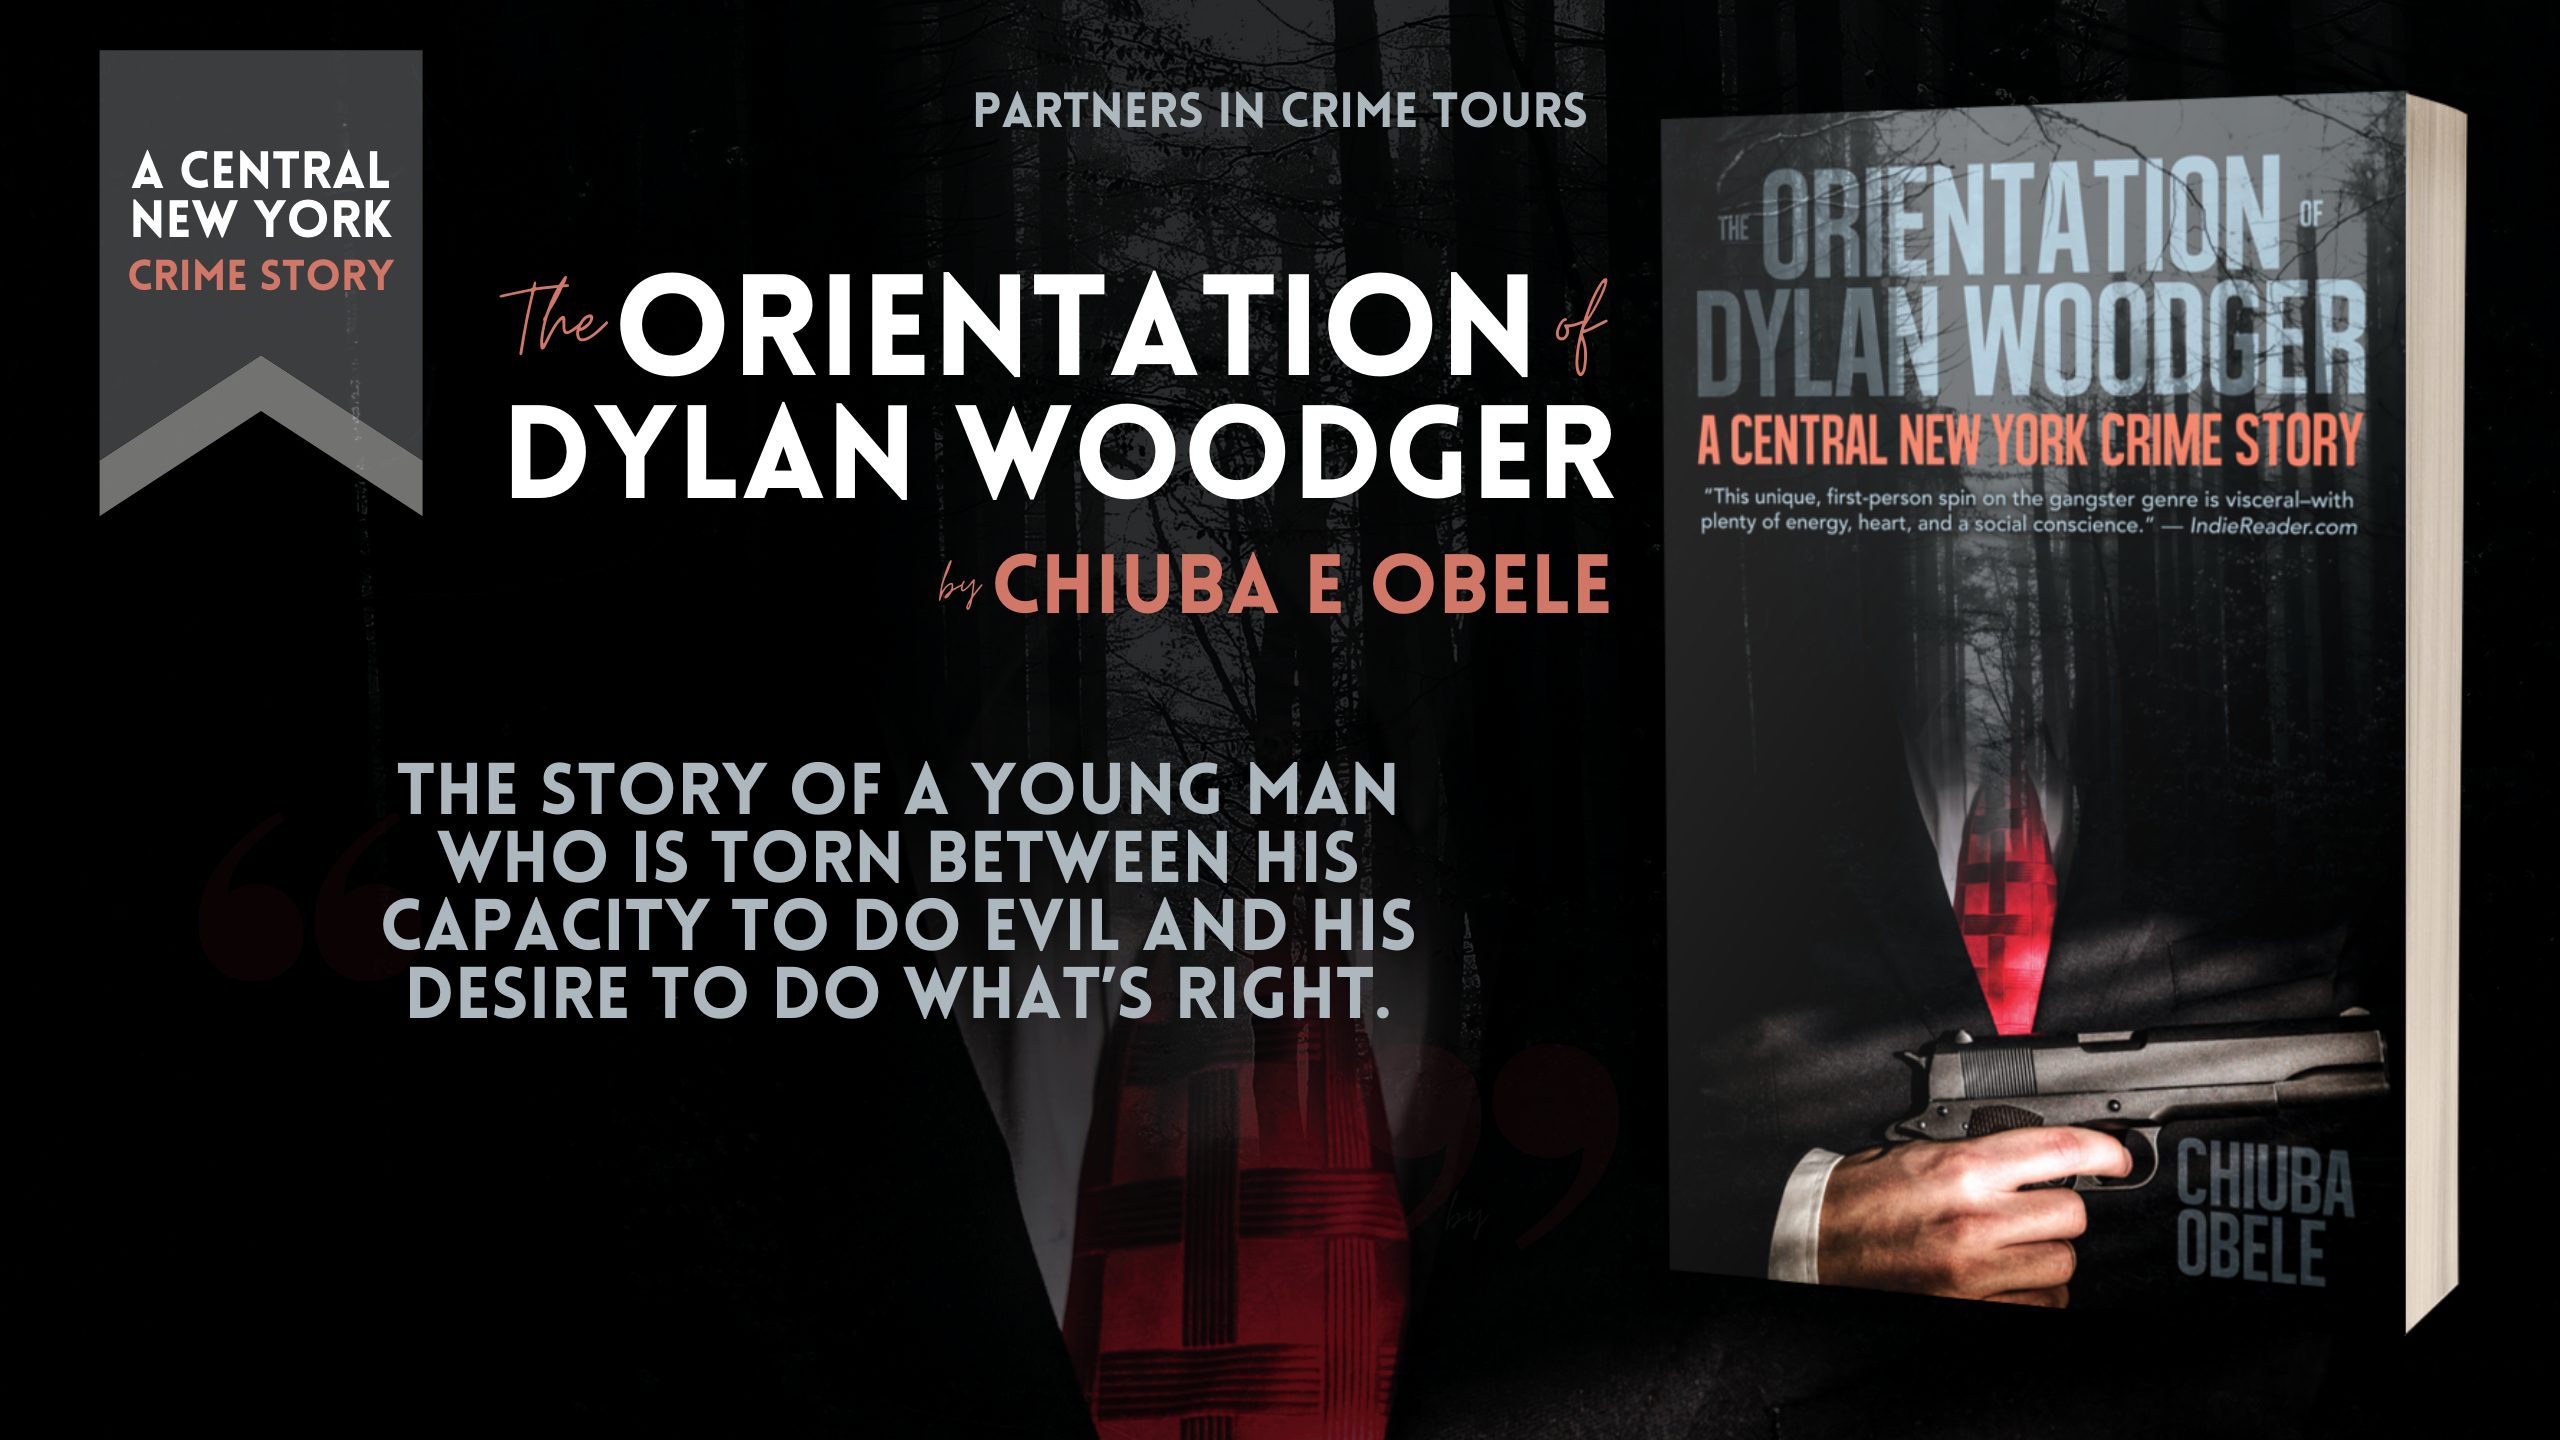 The Orientation of Dylan Woodger by Chiuba E Obele Banner